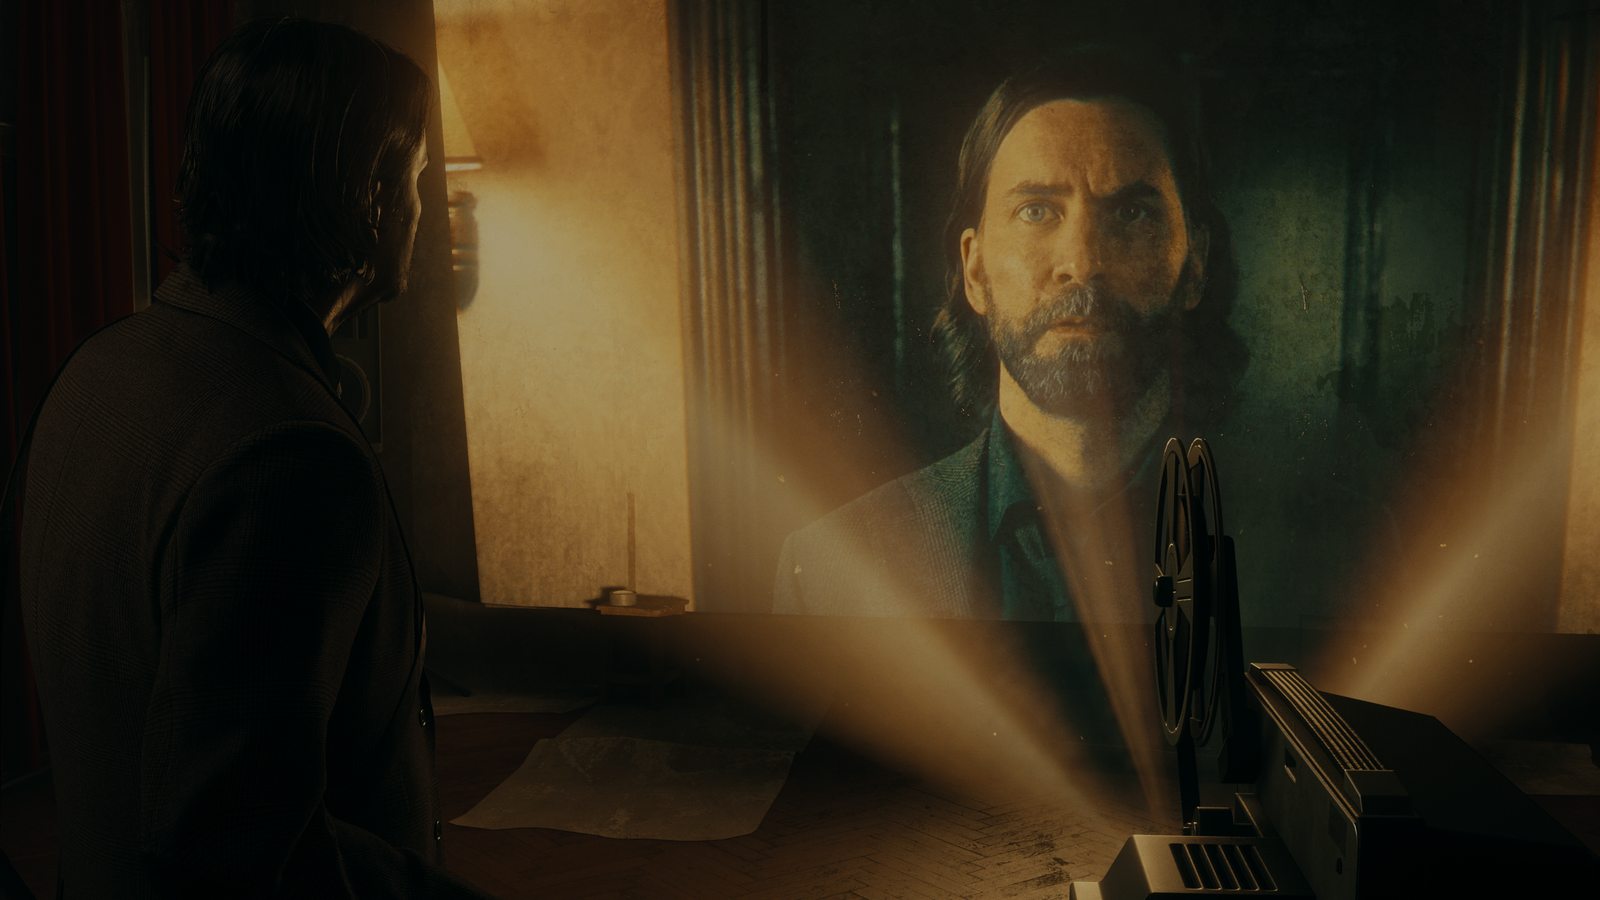 Alan Wake 2, Games of the Year 2023